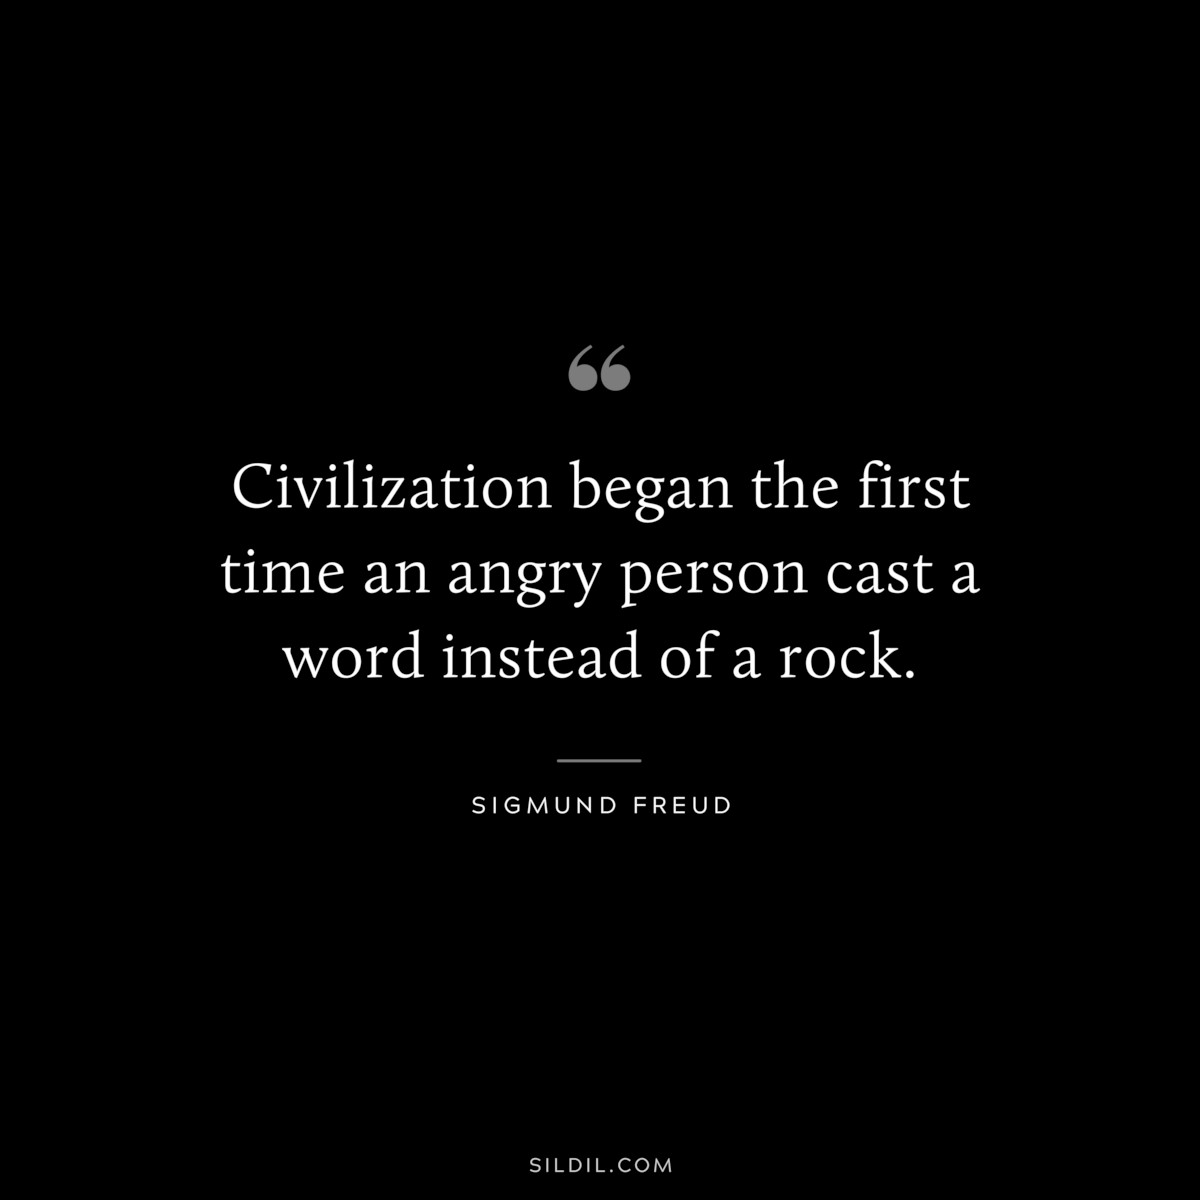 Civilization began the first time an angry person cast a word instead of a rock. ― Sigmund Frued